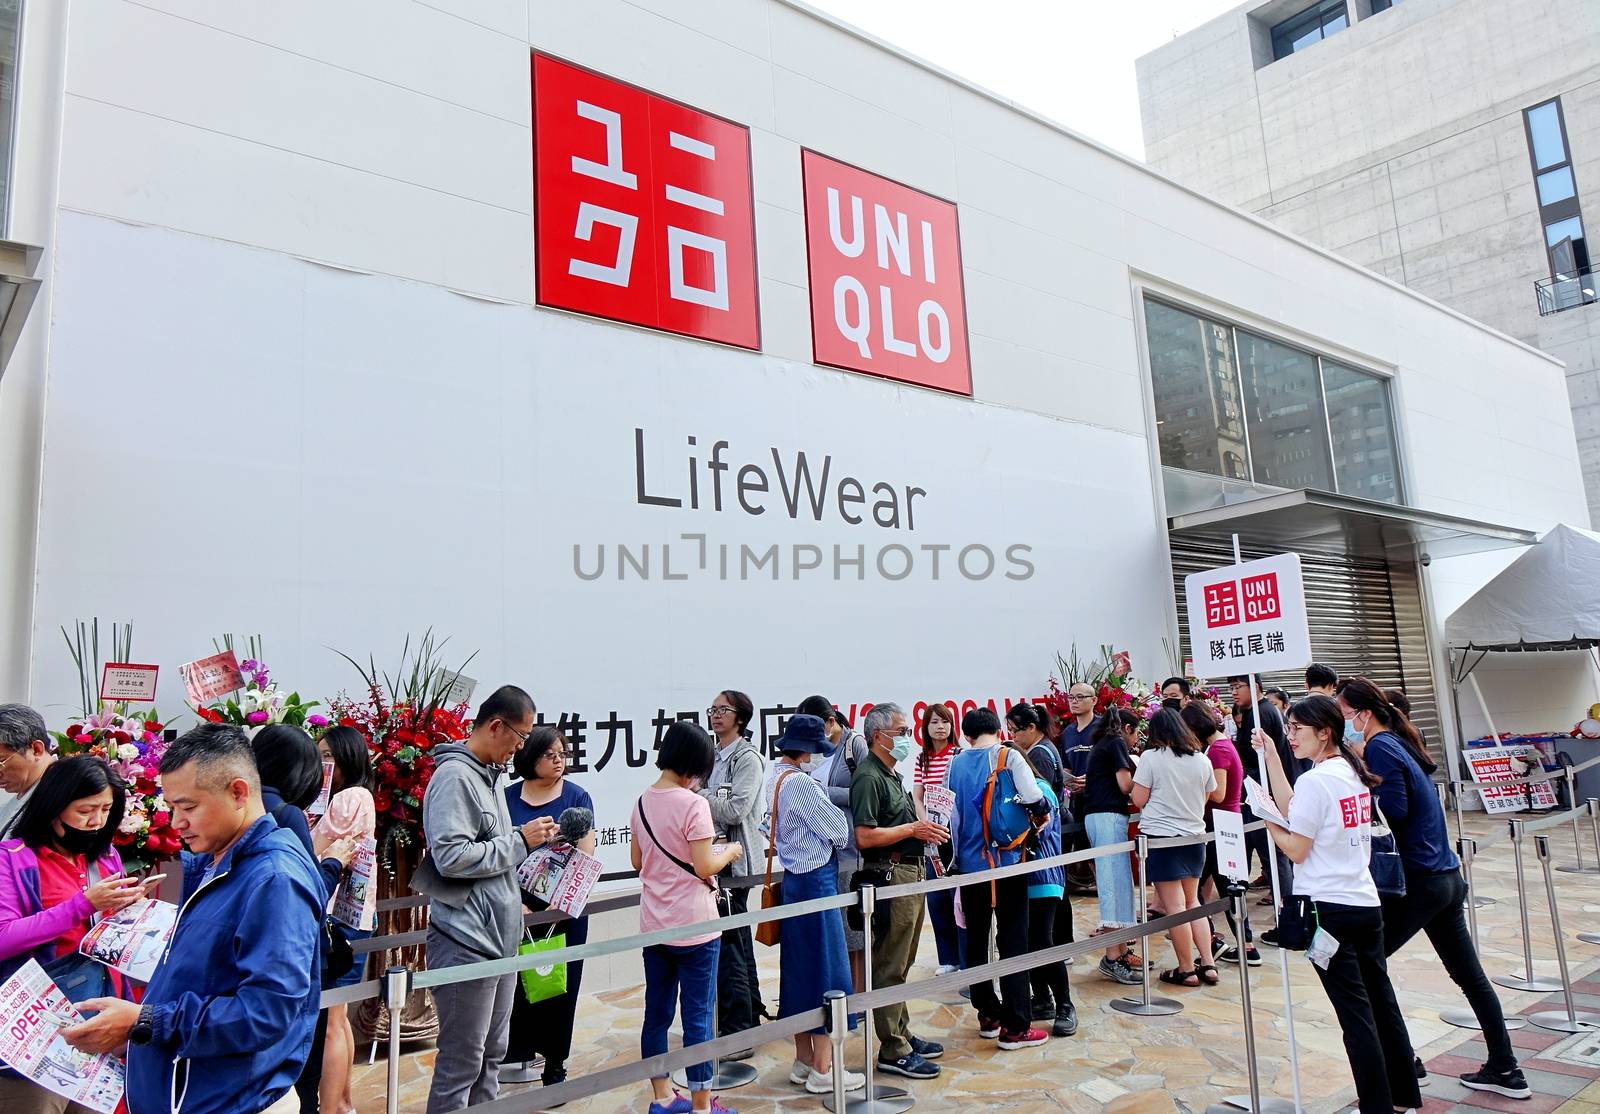 KAOHSIUNG, TAIWAN -- APRIL 20, 2018: People stand in line waiting for the grand opening of a new clothing store of the Uniqlo brand.
